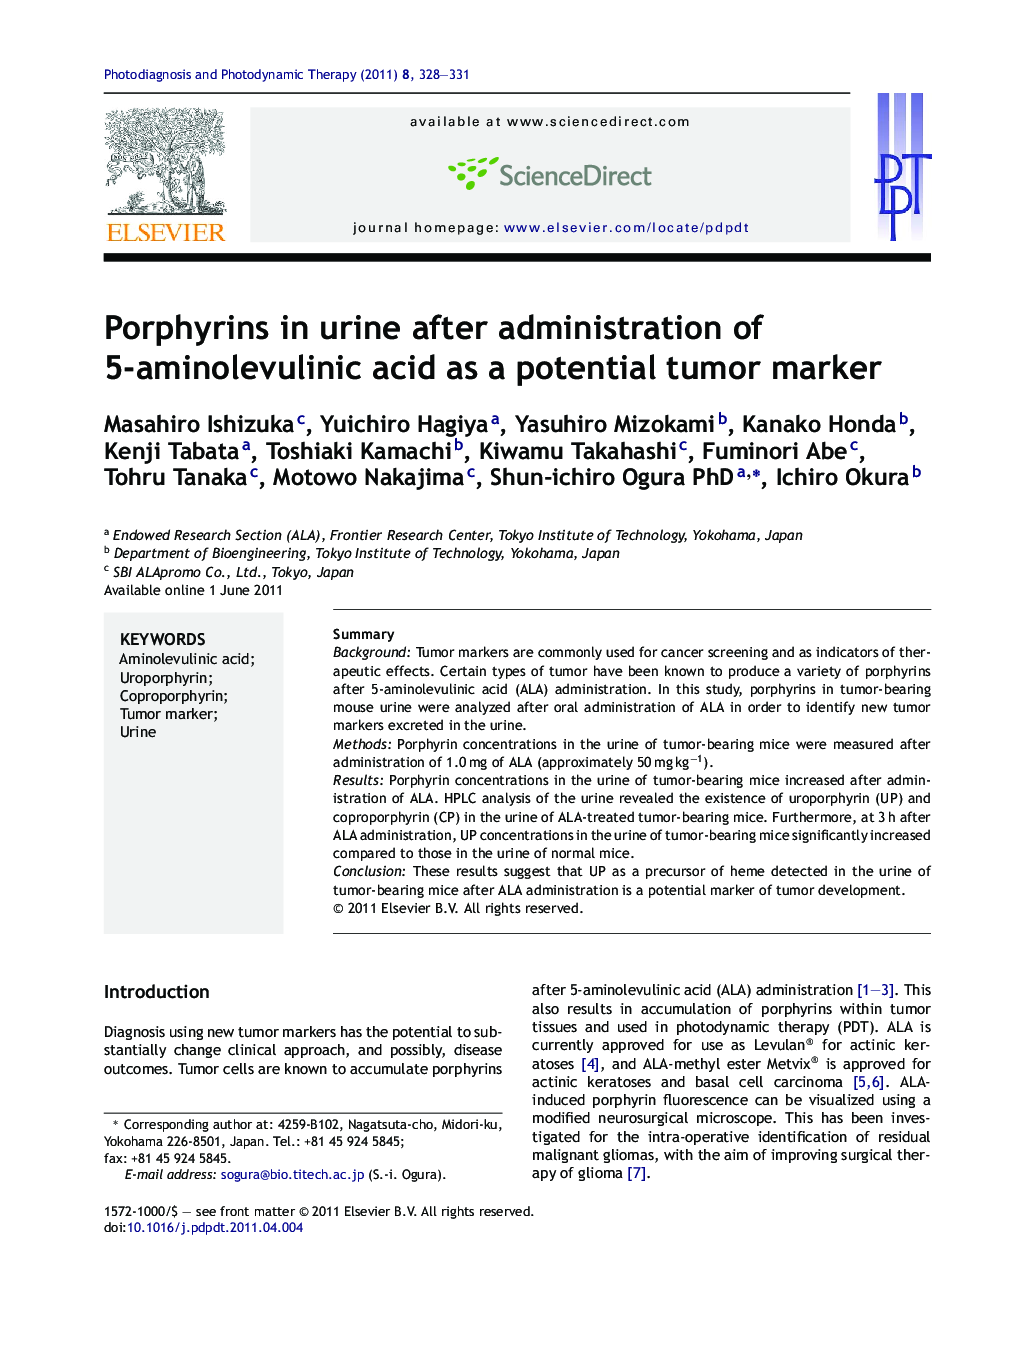 Porphyrins in urine after administration of 5-aminolevulinic acid as a potential tumor marker